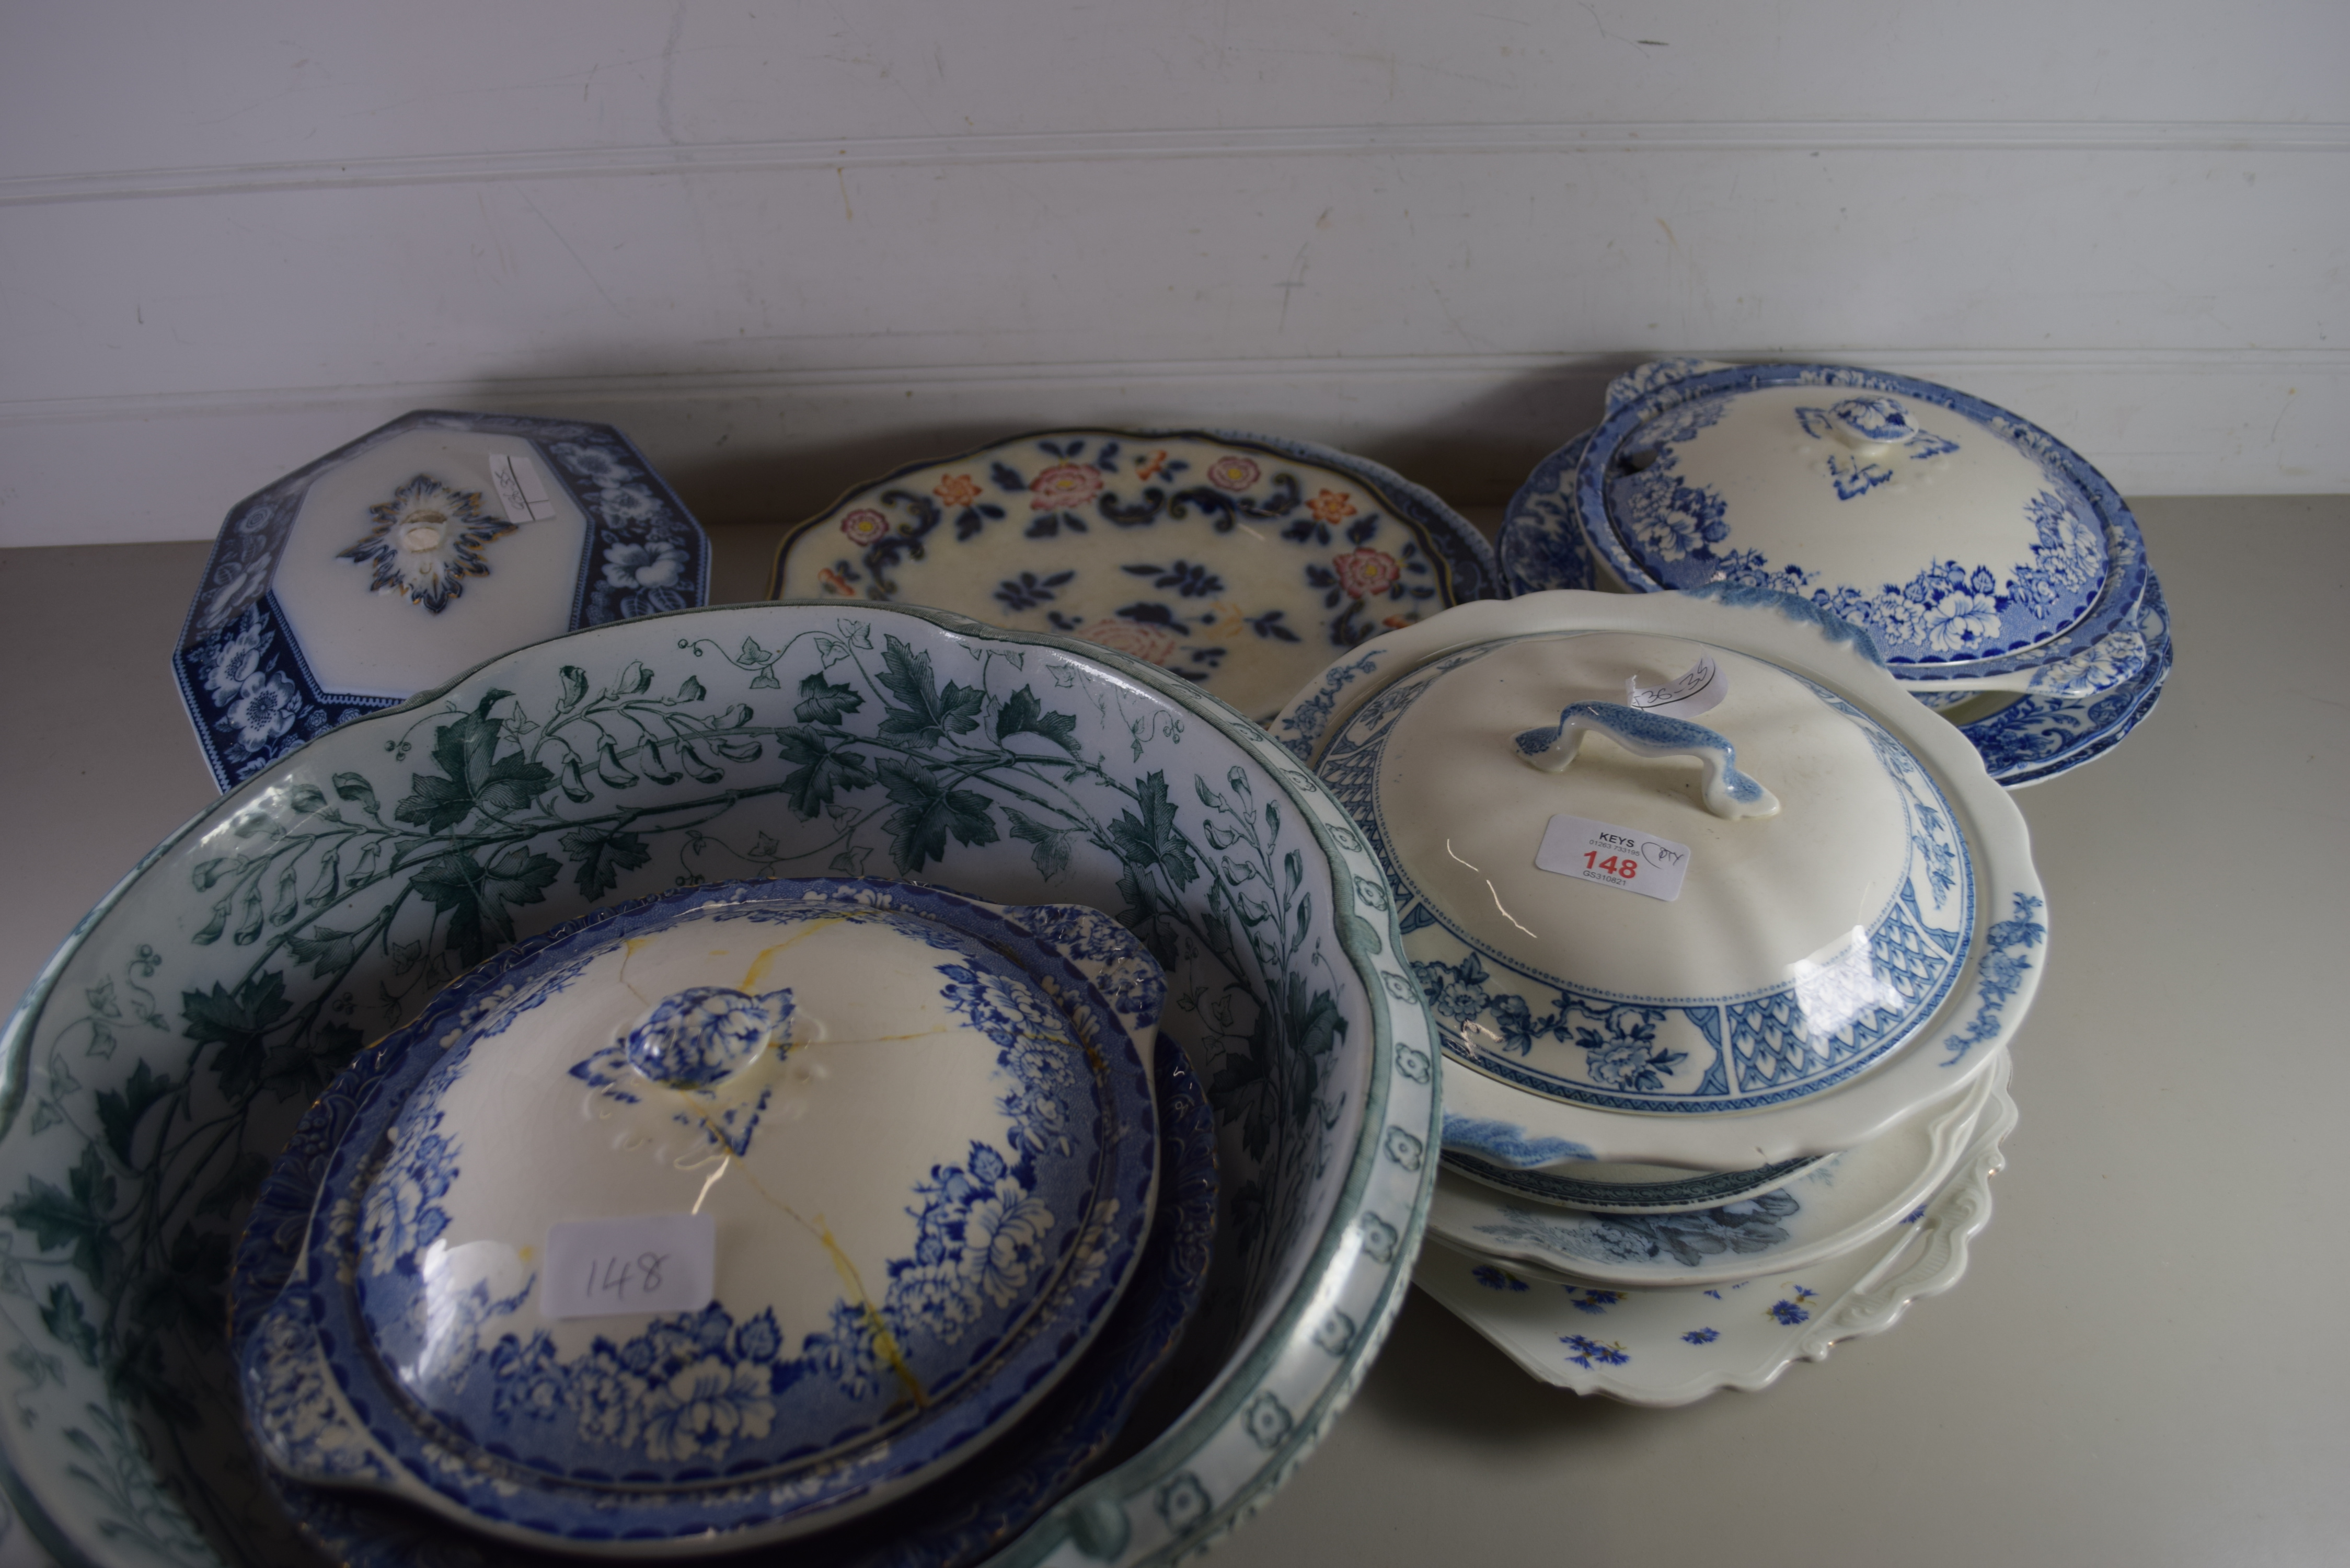 MIXED LOT OF CERAMICS TO INCLUDE A VICTORIAN WASH BOWL, VARIOUS BLUE AND WHITE TUREENS, PLATES ETC